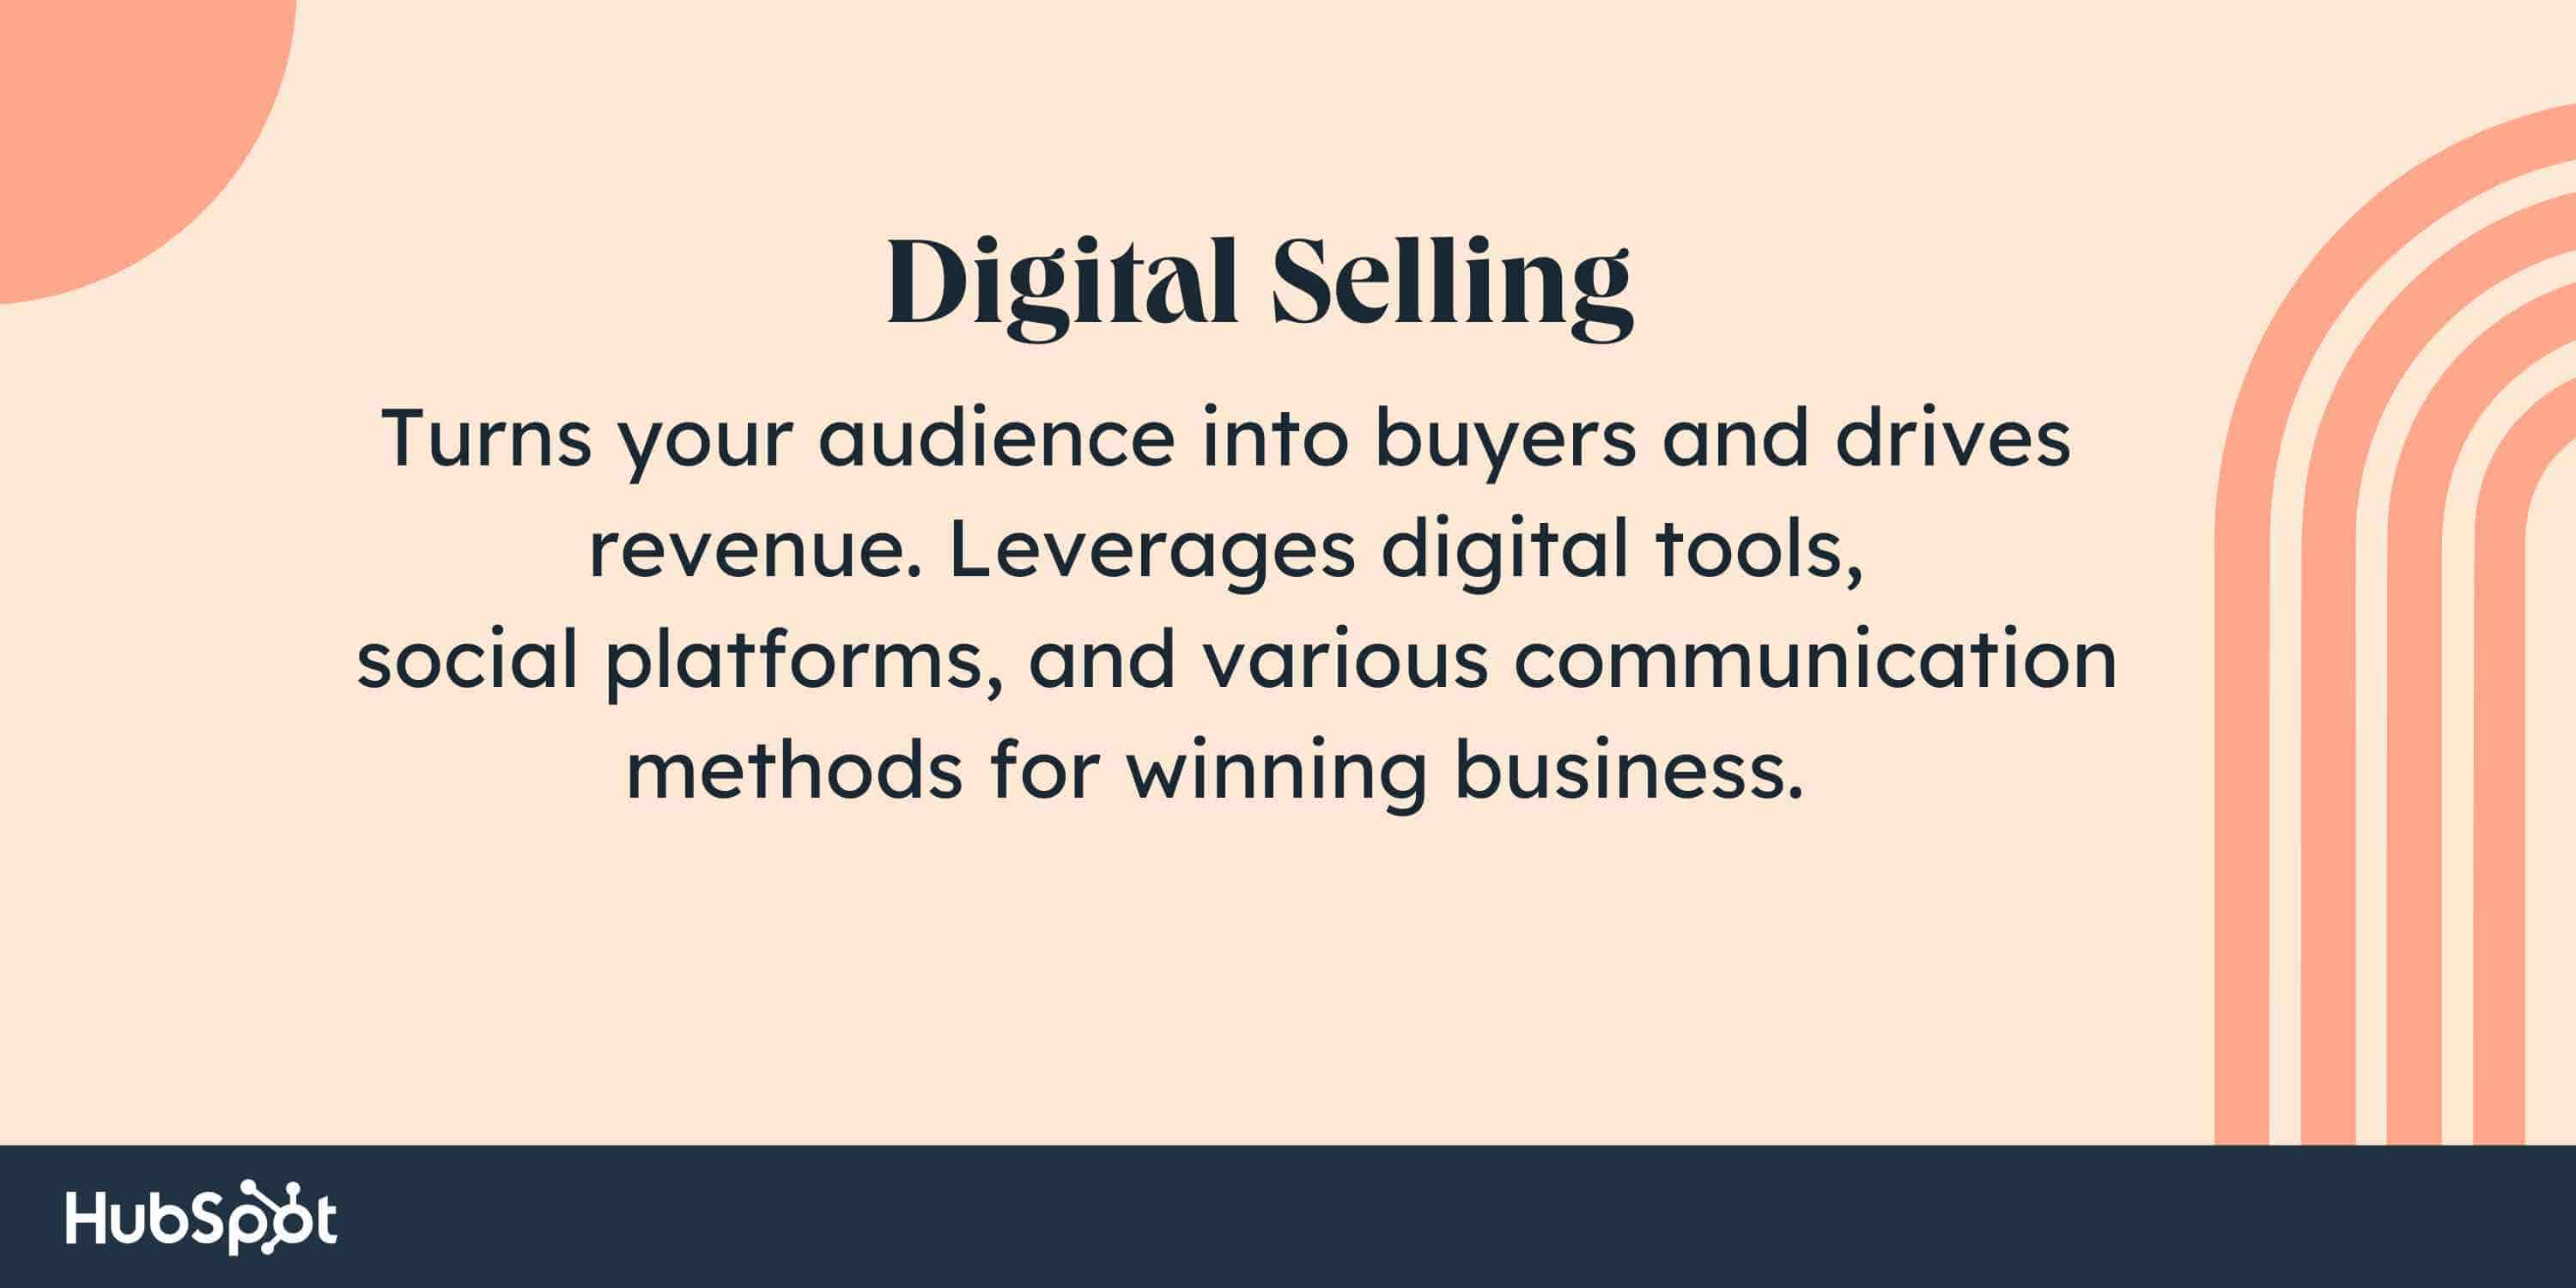 Digital Selling. Turns your audience into buyers and drives revenue. Leverages digital tools, social platforms, and various communication methods for winning business.